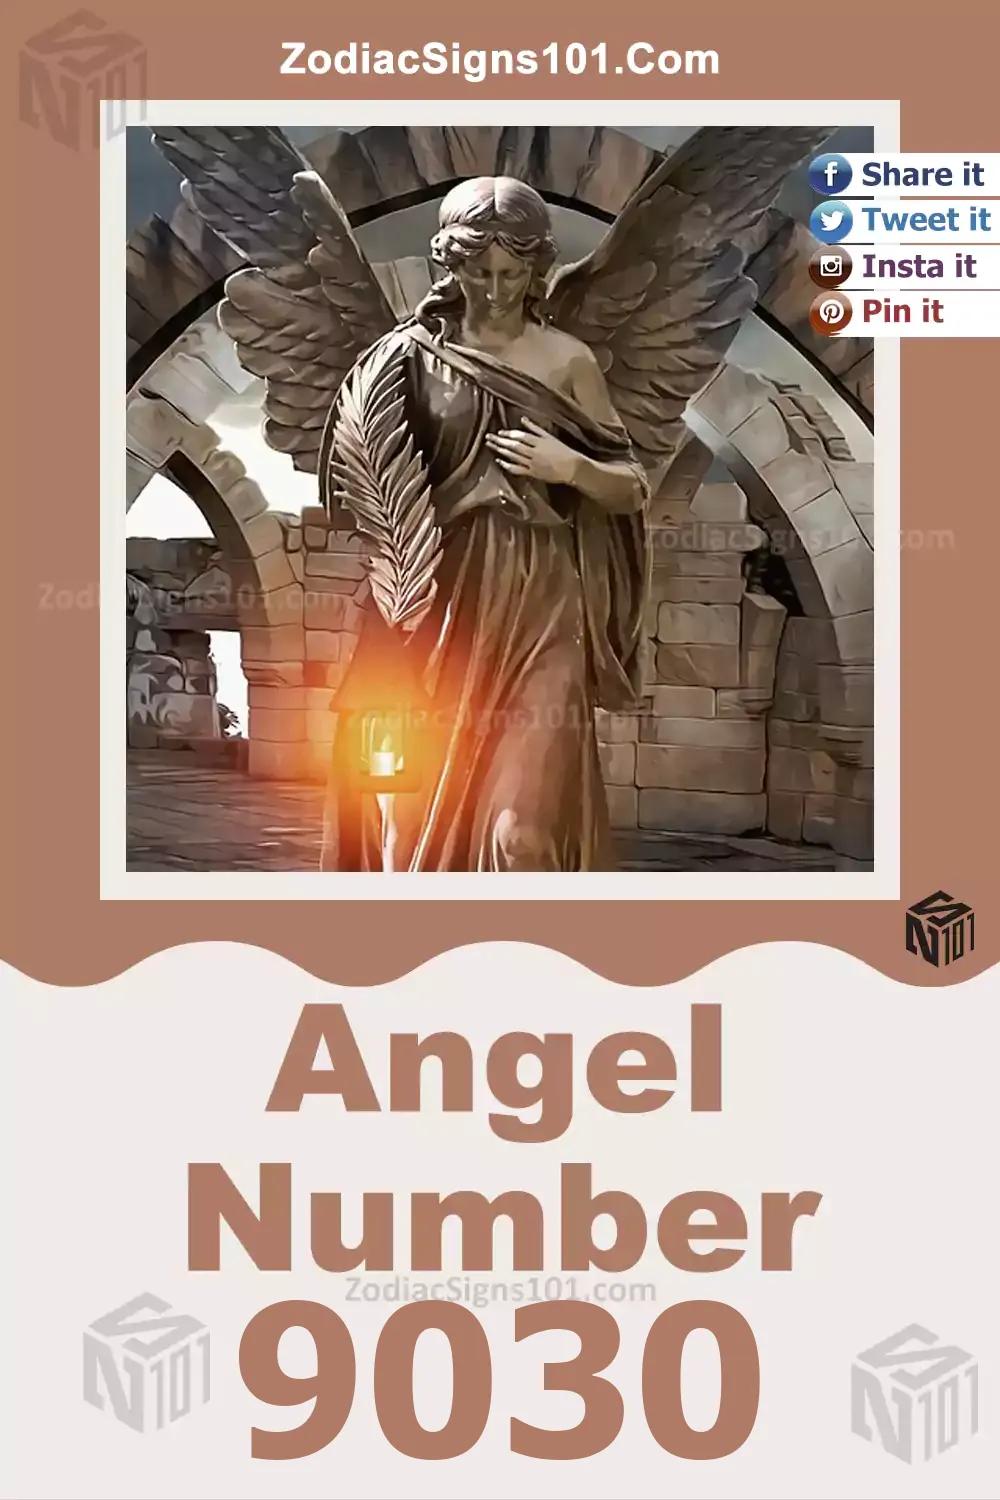 9030 Angel Number Meaning